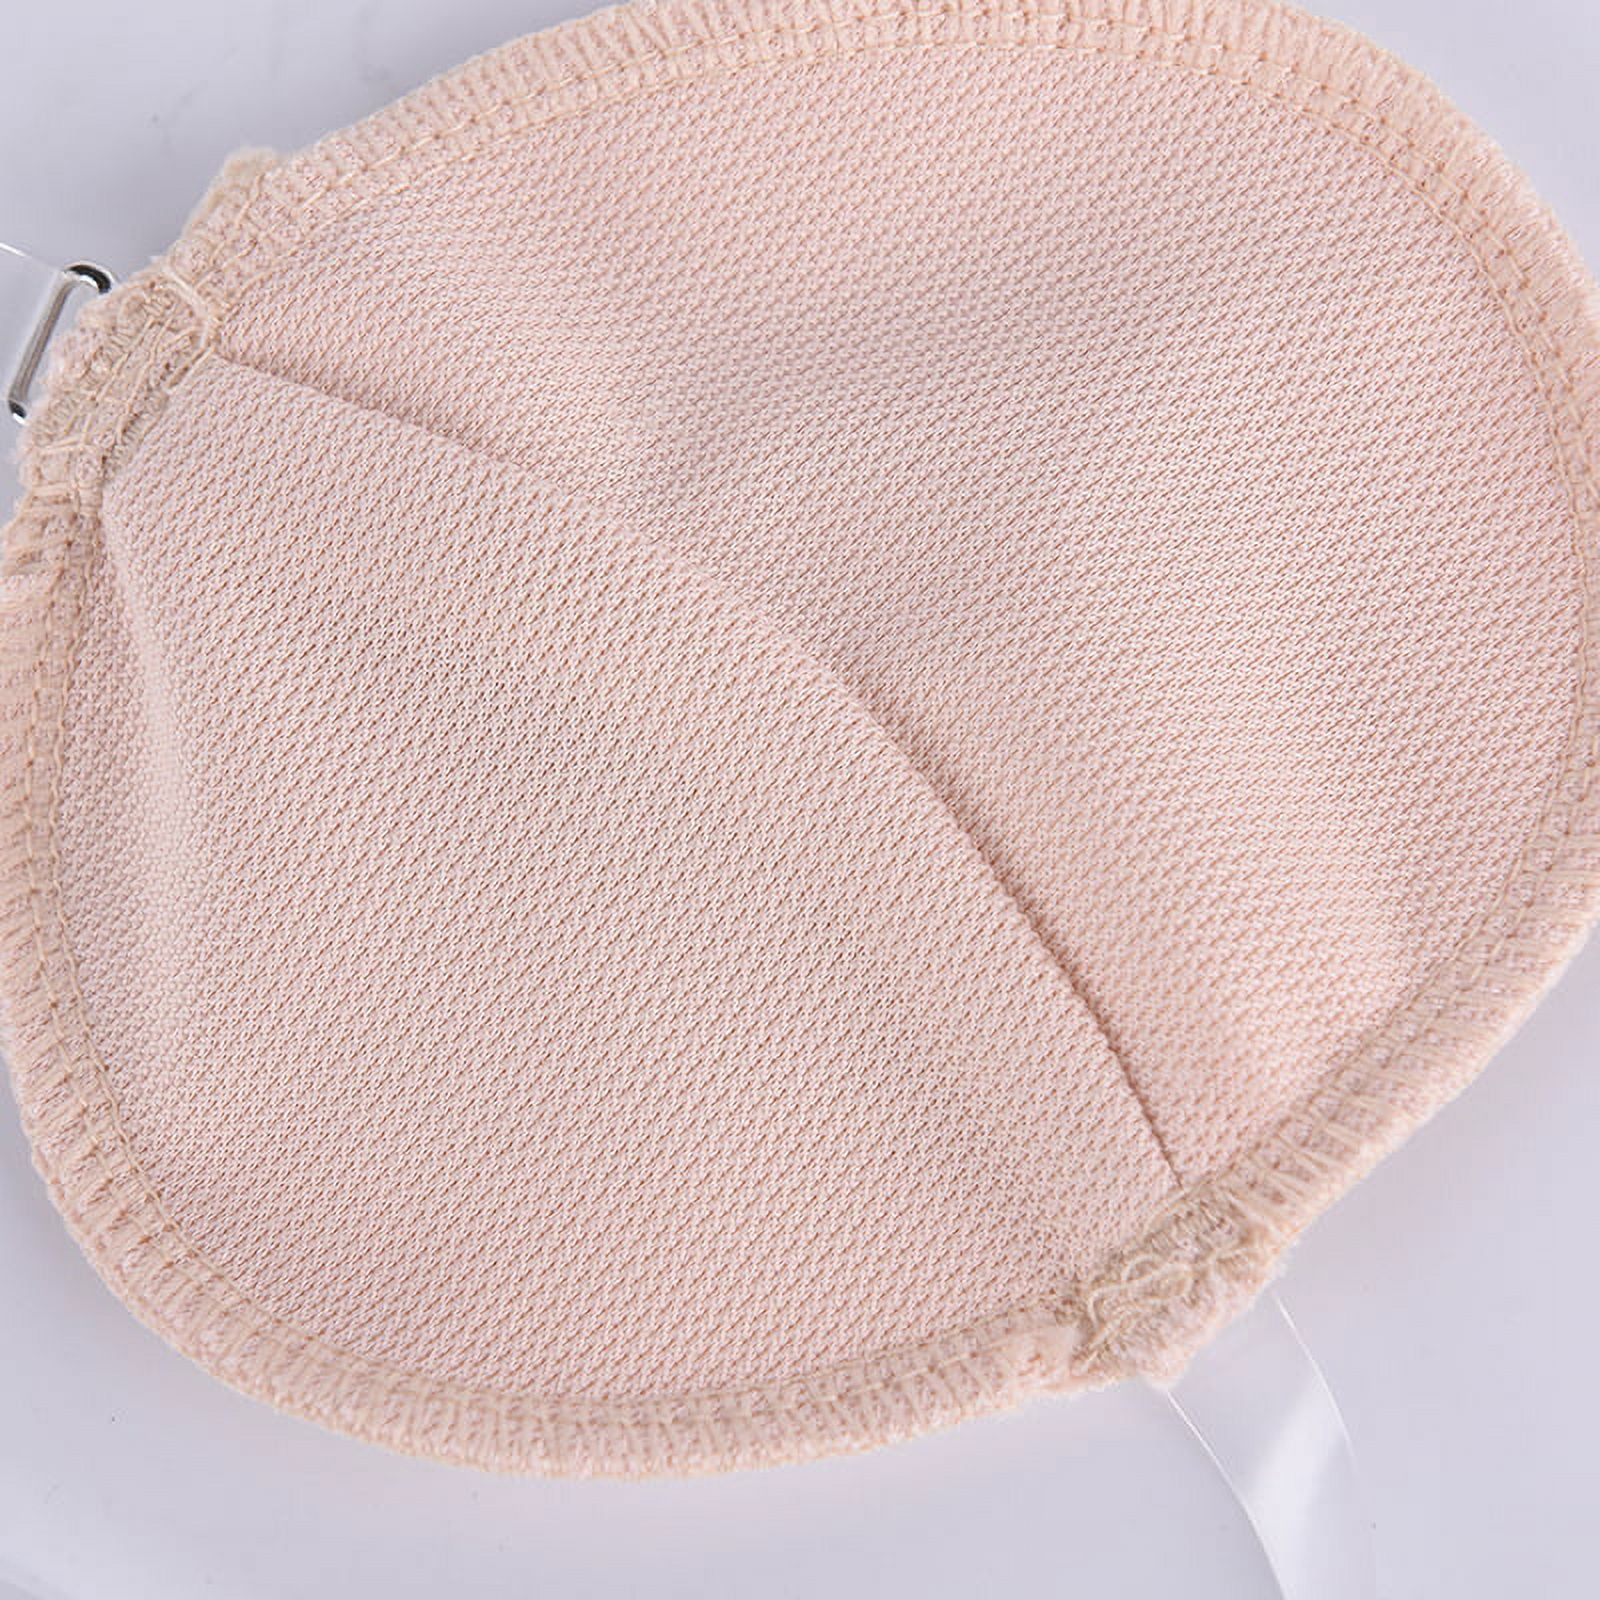 Buy 1Pair Underarm Sweat Shield Pad Washable Armpit Absorbing Sweat Guards  Strap at affordable prices — free shipping, real reviews with photos — Joom